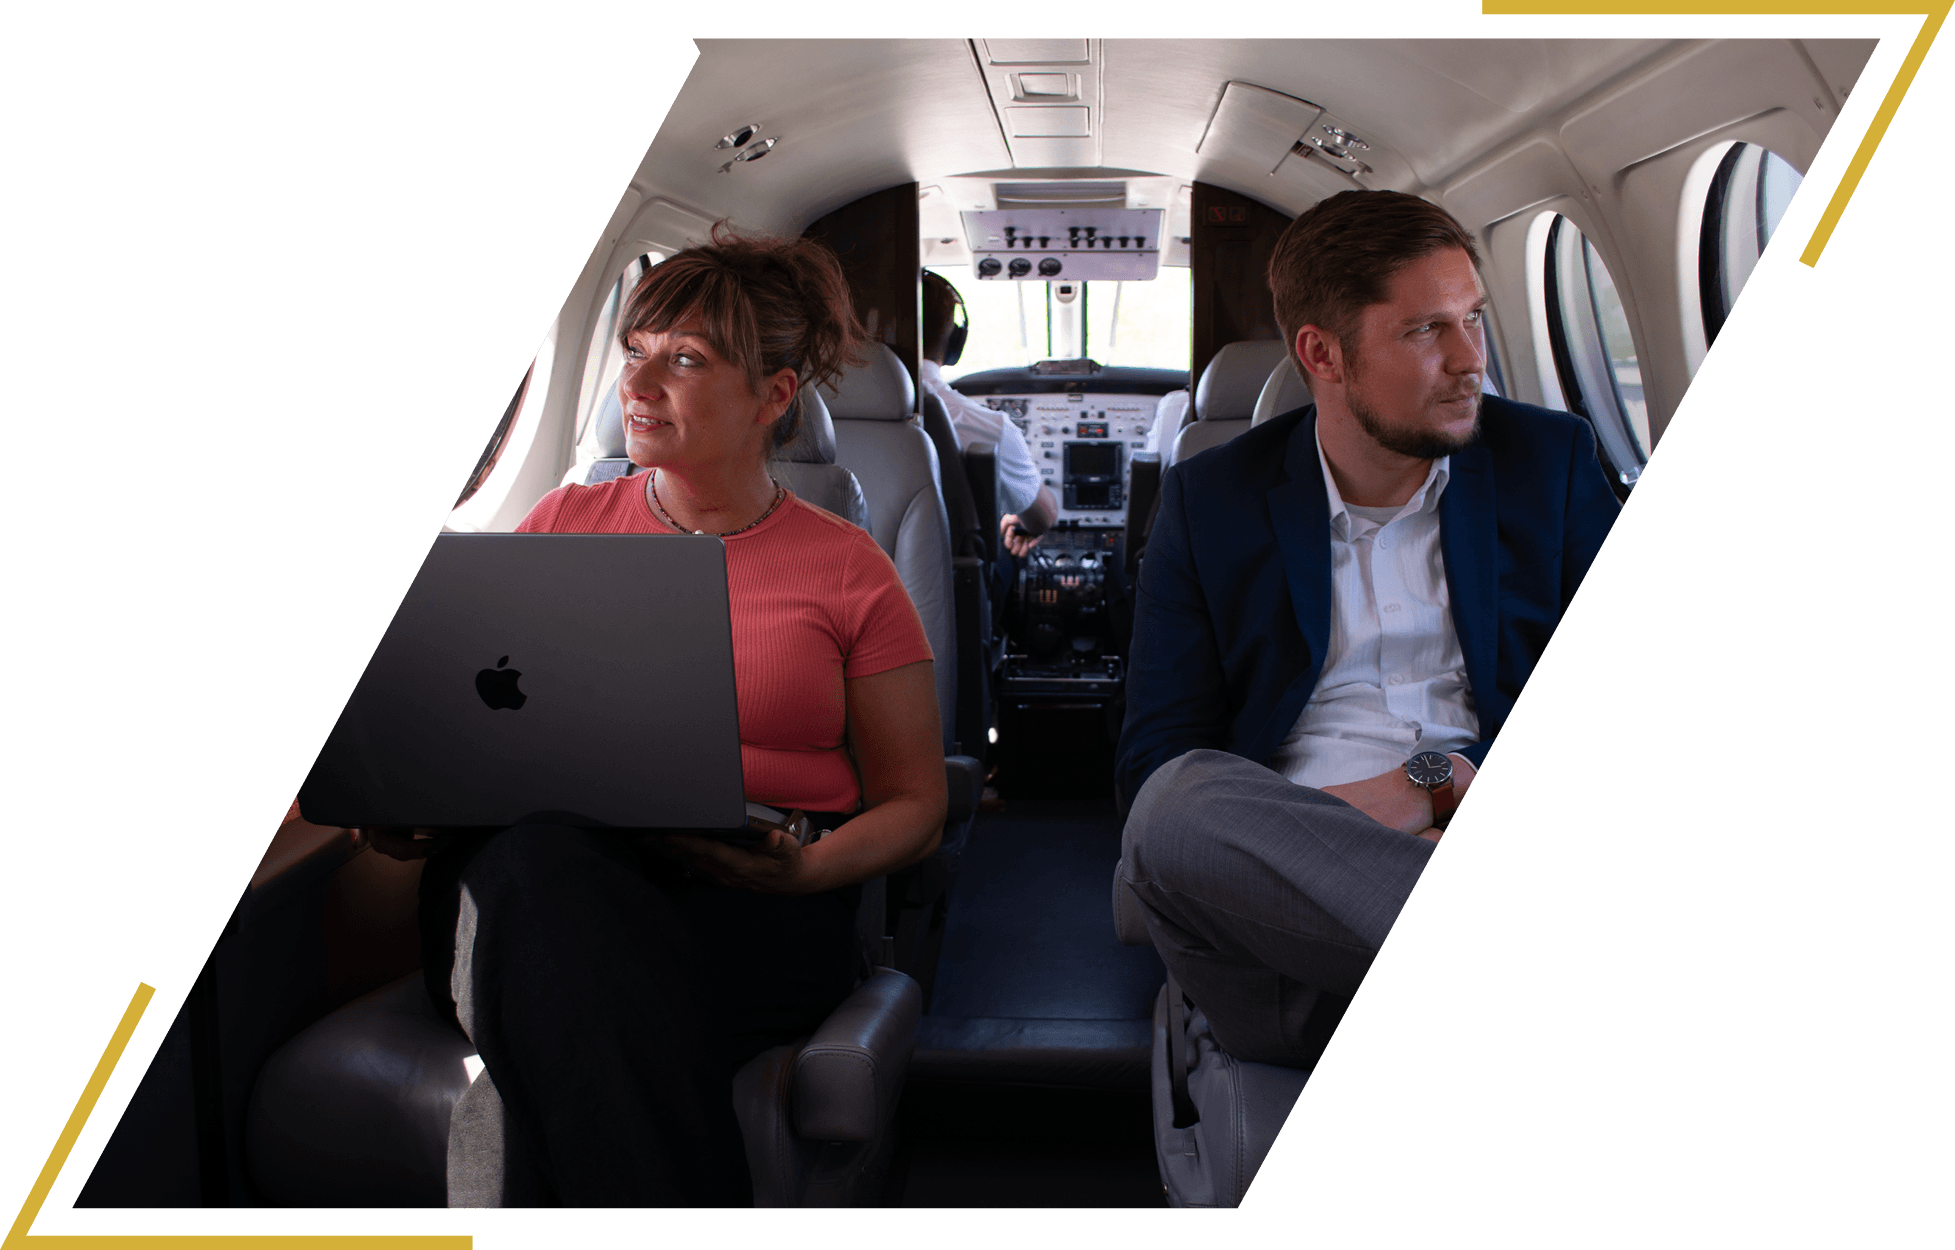 With the ability to work or conduct business while on board, Griffing Flying Service chartered jets/planes can be a valuable tool for increasing productivity & efficiency, allowing you to arrive at your destination ready to hit the ground running.